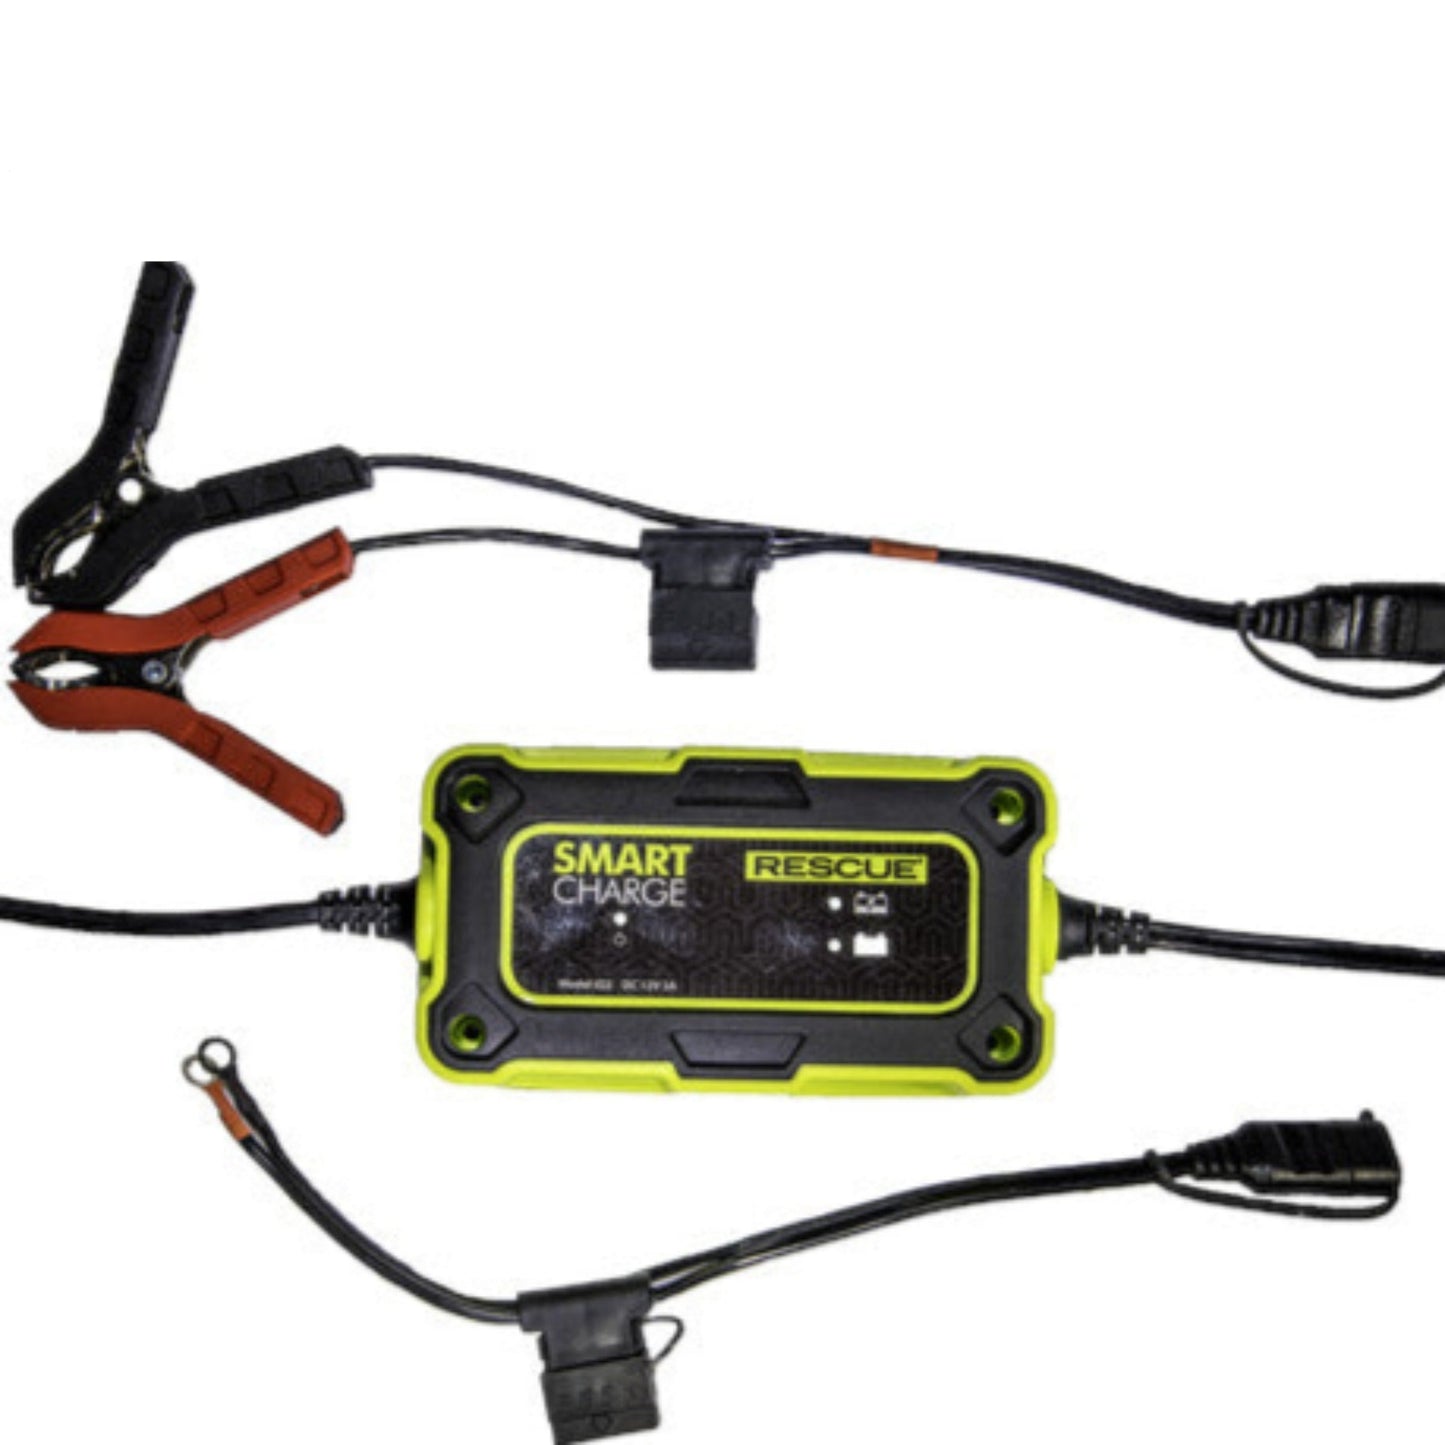 BATTERY MAINTAINER, 2AMP, AUTOMATIC BATTERY CHARGER